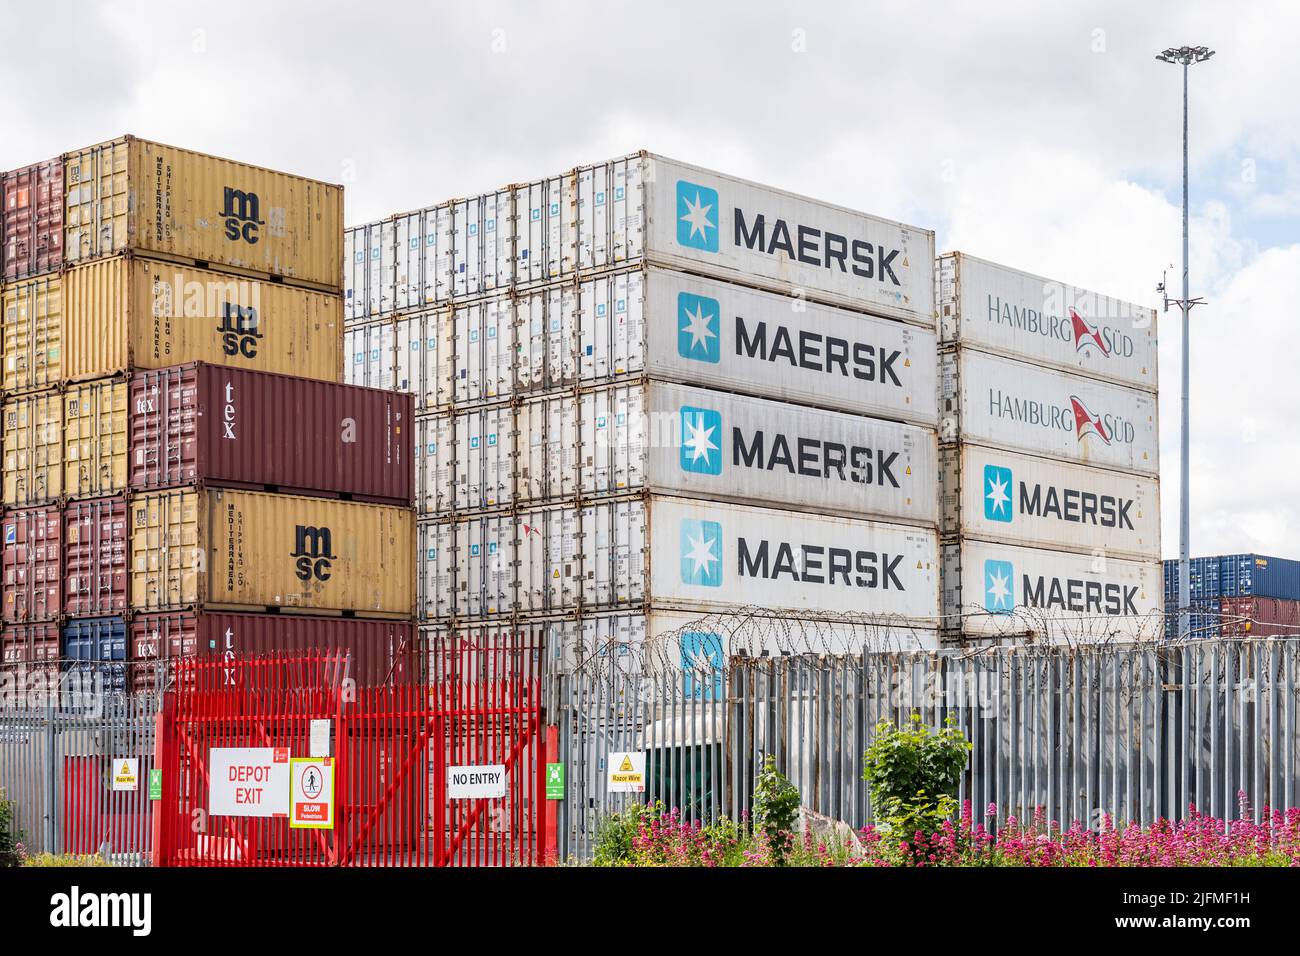 Shipping containers stacjed at Dublin Port, Dublin, Ireland. Stock Photo